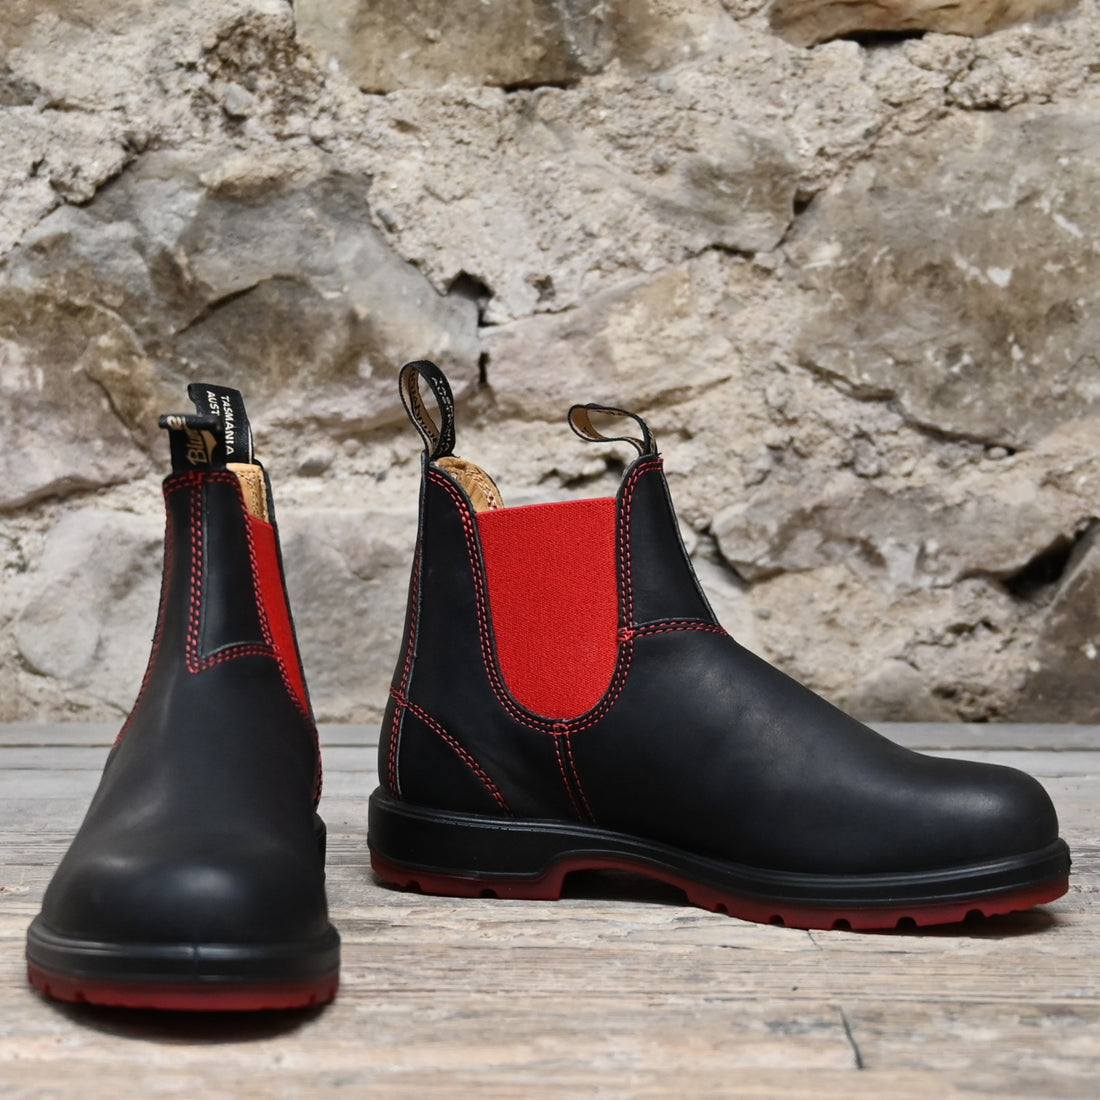 Blundstone Slip On In Black Premium Leather With Red Elastic And Red Outsole view of front and side